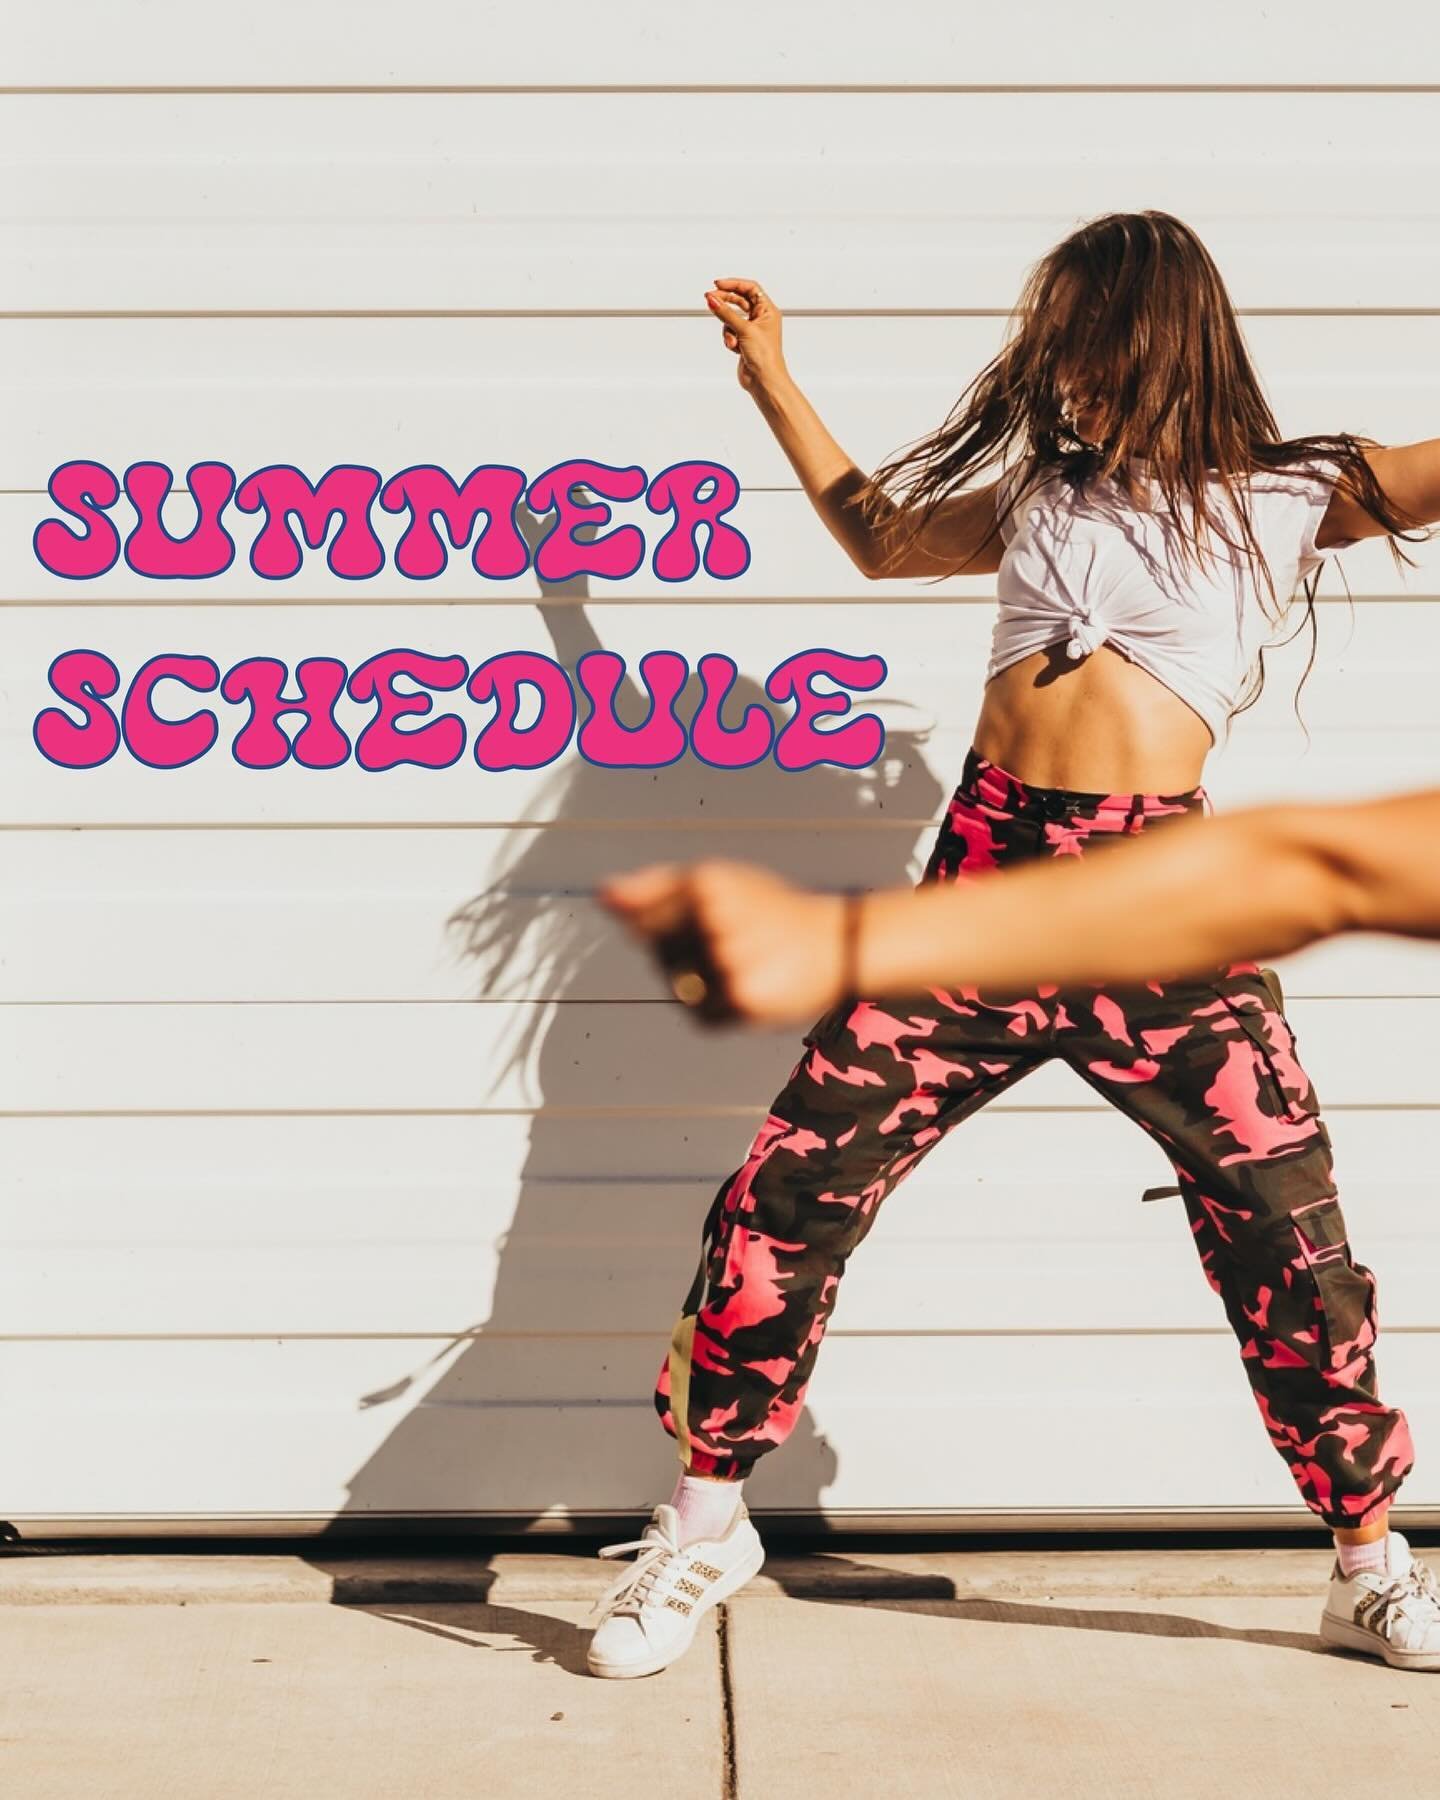 Summer term registration is now open to currently enrolled students &amp; opens to new students in one week (5/14) 💃🏽🌞 Find the schedule below &amp; read more + sign up via the link in our bio or at nkstudiosbingen.com! 

Summer Term: July 15th - 